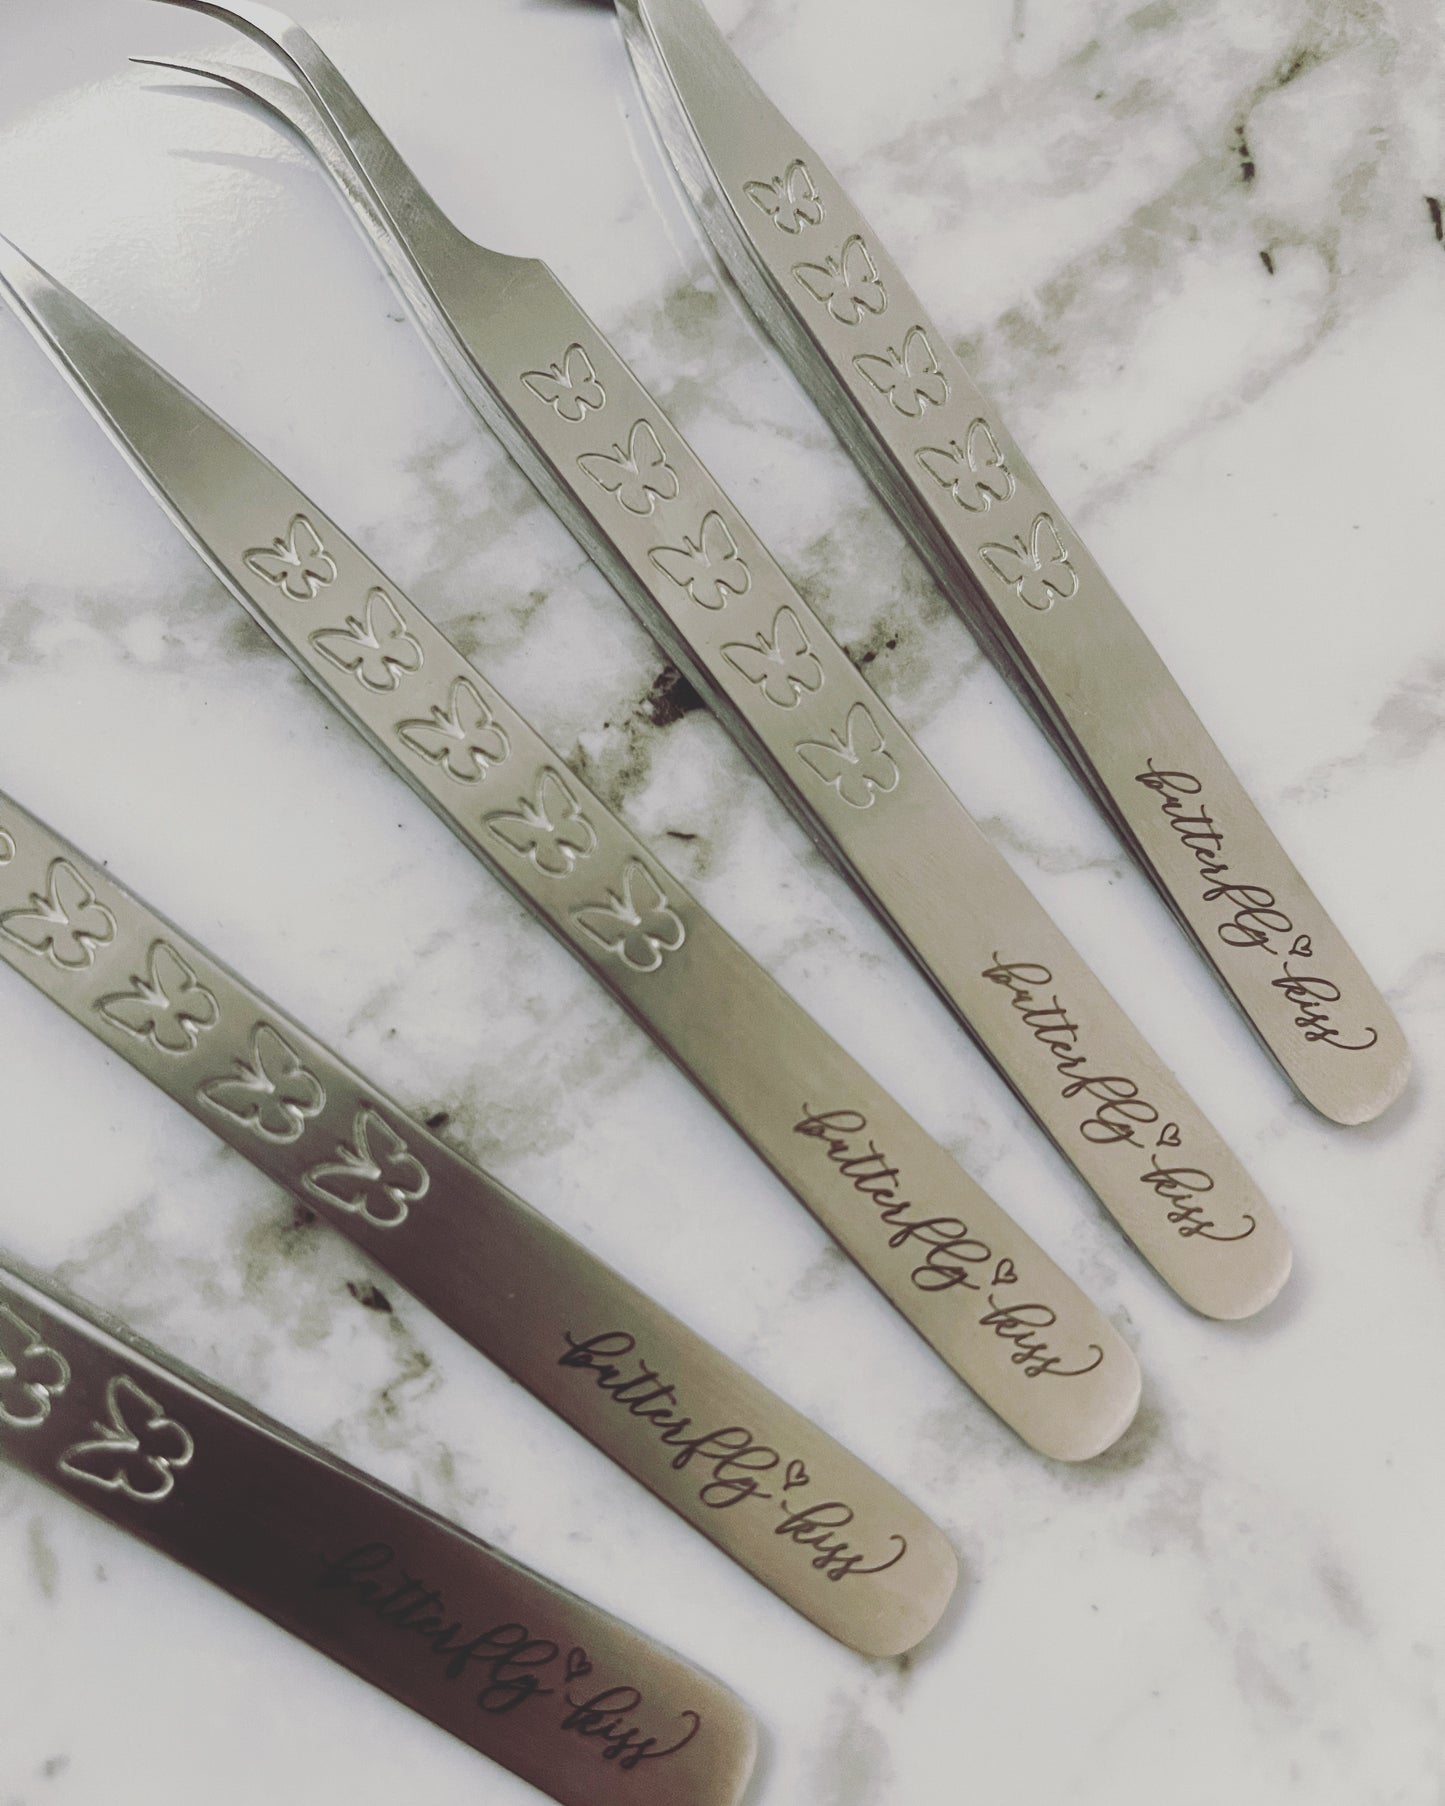 butterfly tweezer collection